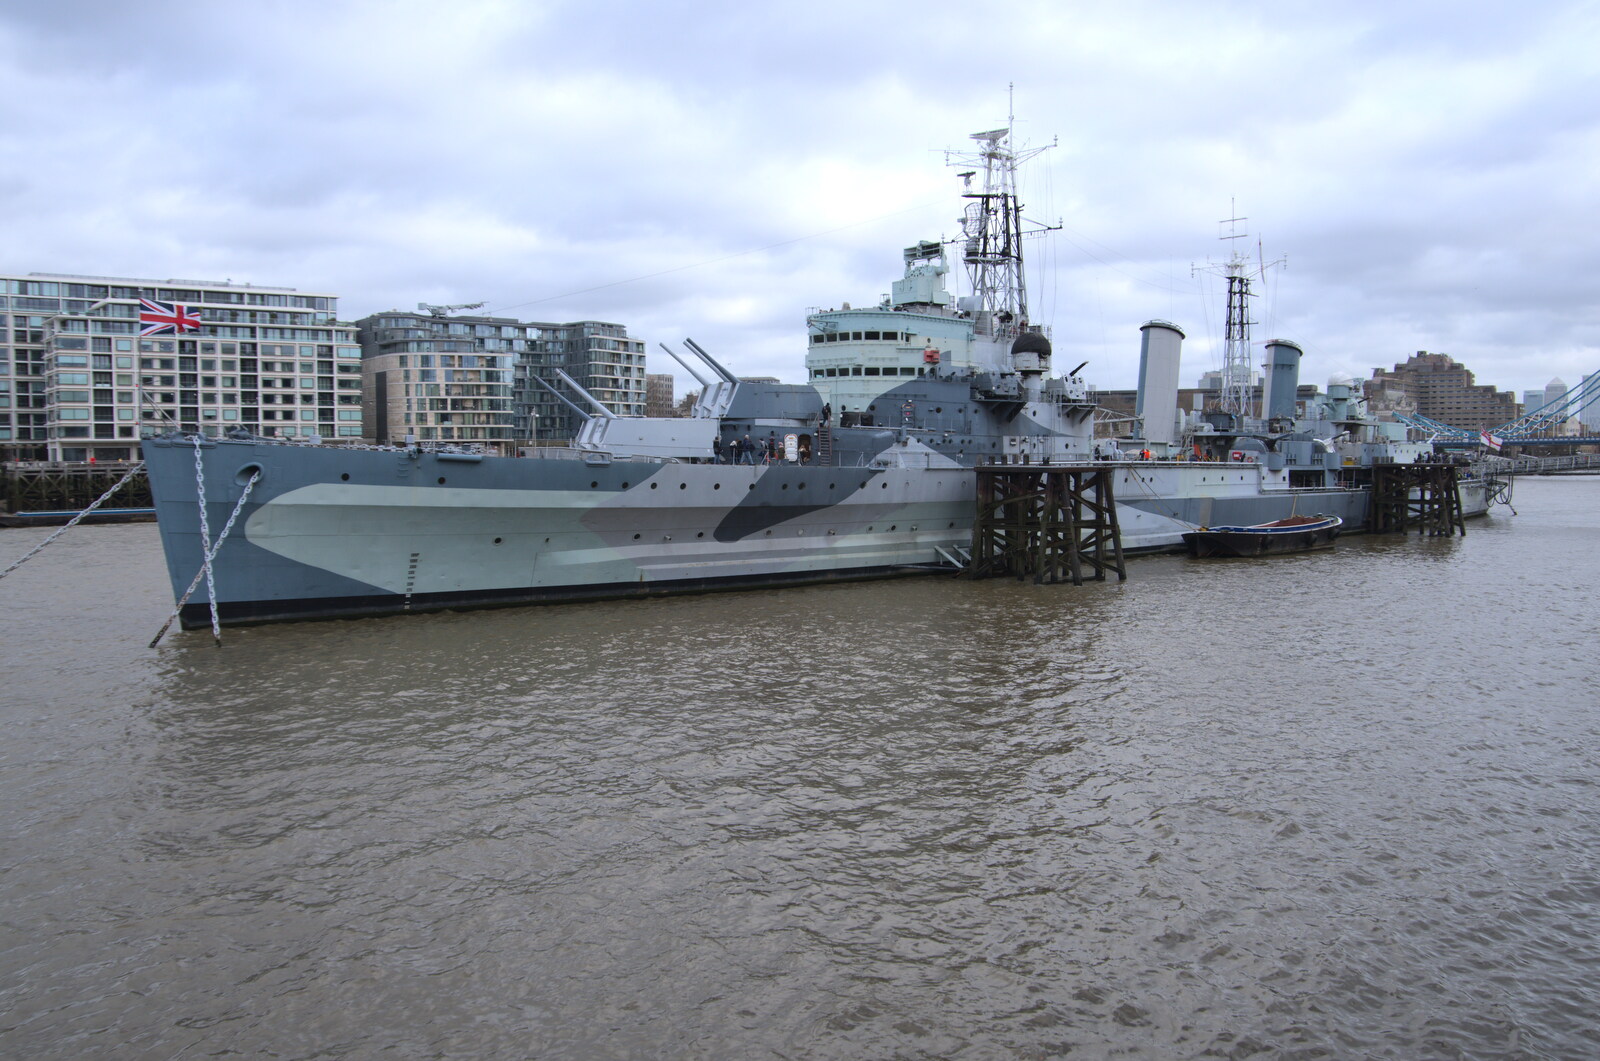 HMS Belfast from HMS Belfast and the South Bank, Southwark, London - 17th February 2020